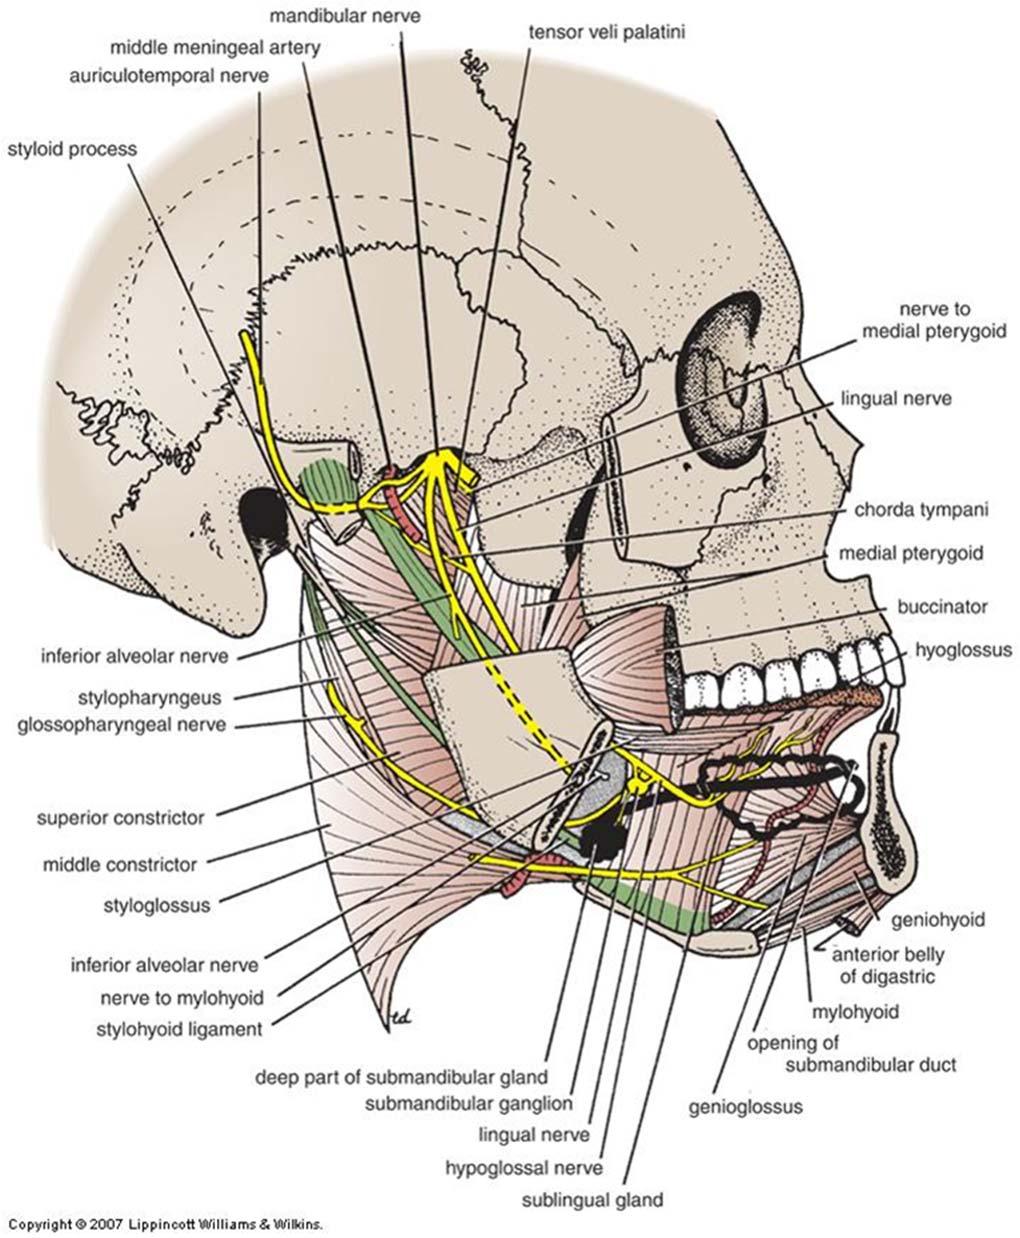 Mandibular Nerve: Branches Posterior division Auriculotemporal n. Relations TMJ, middle menengeal a. Lingual n.